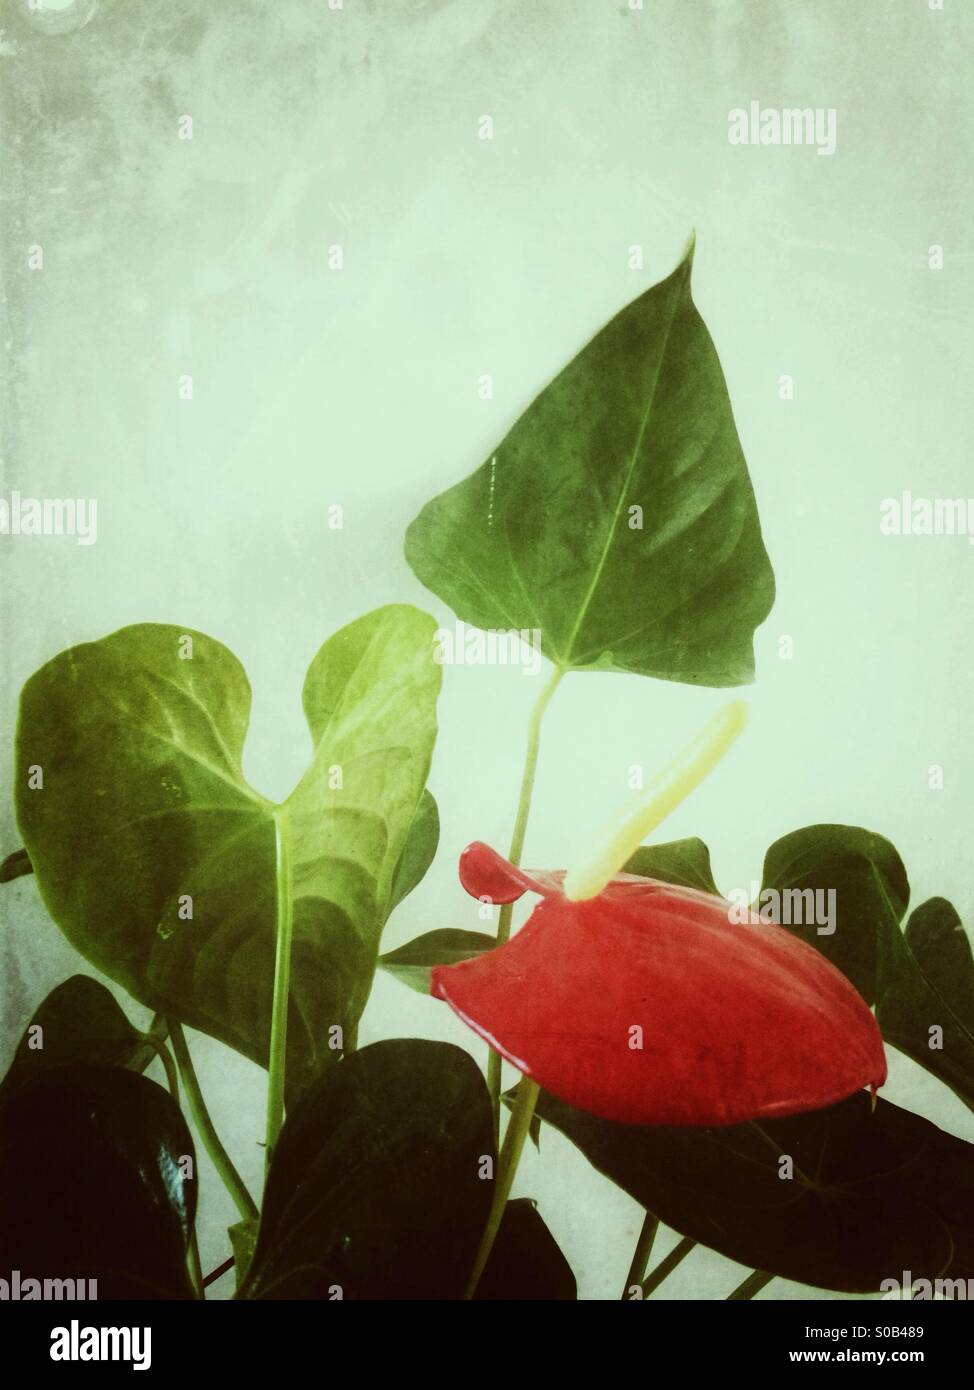 Red anthurium green leaves Stock Photo